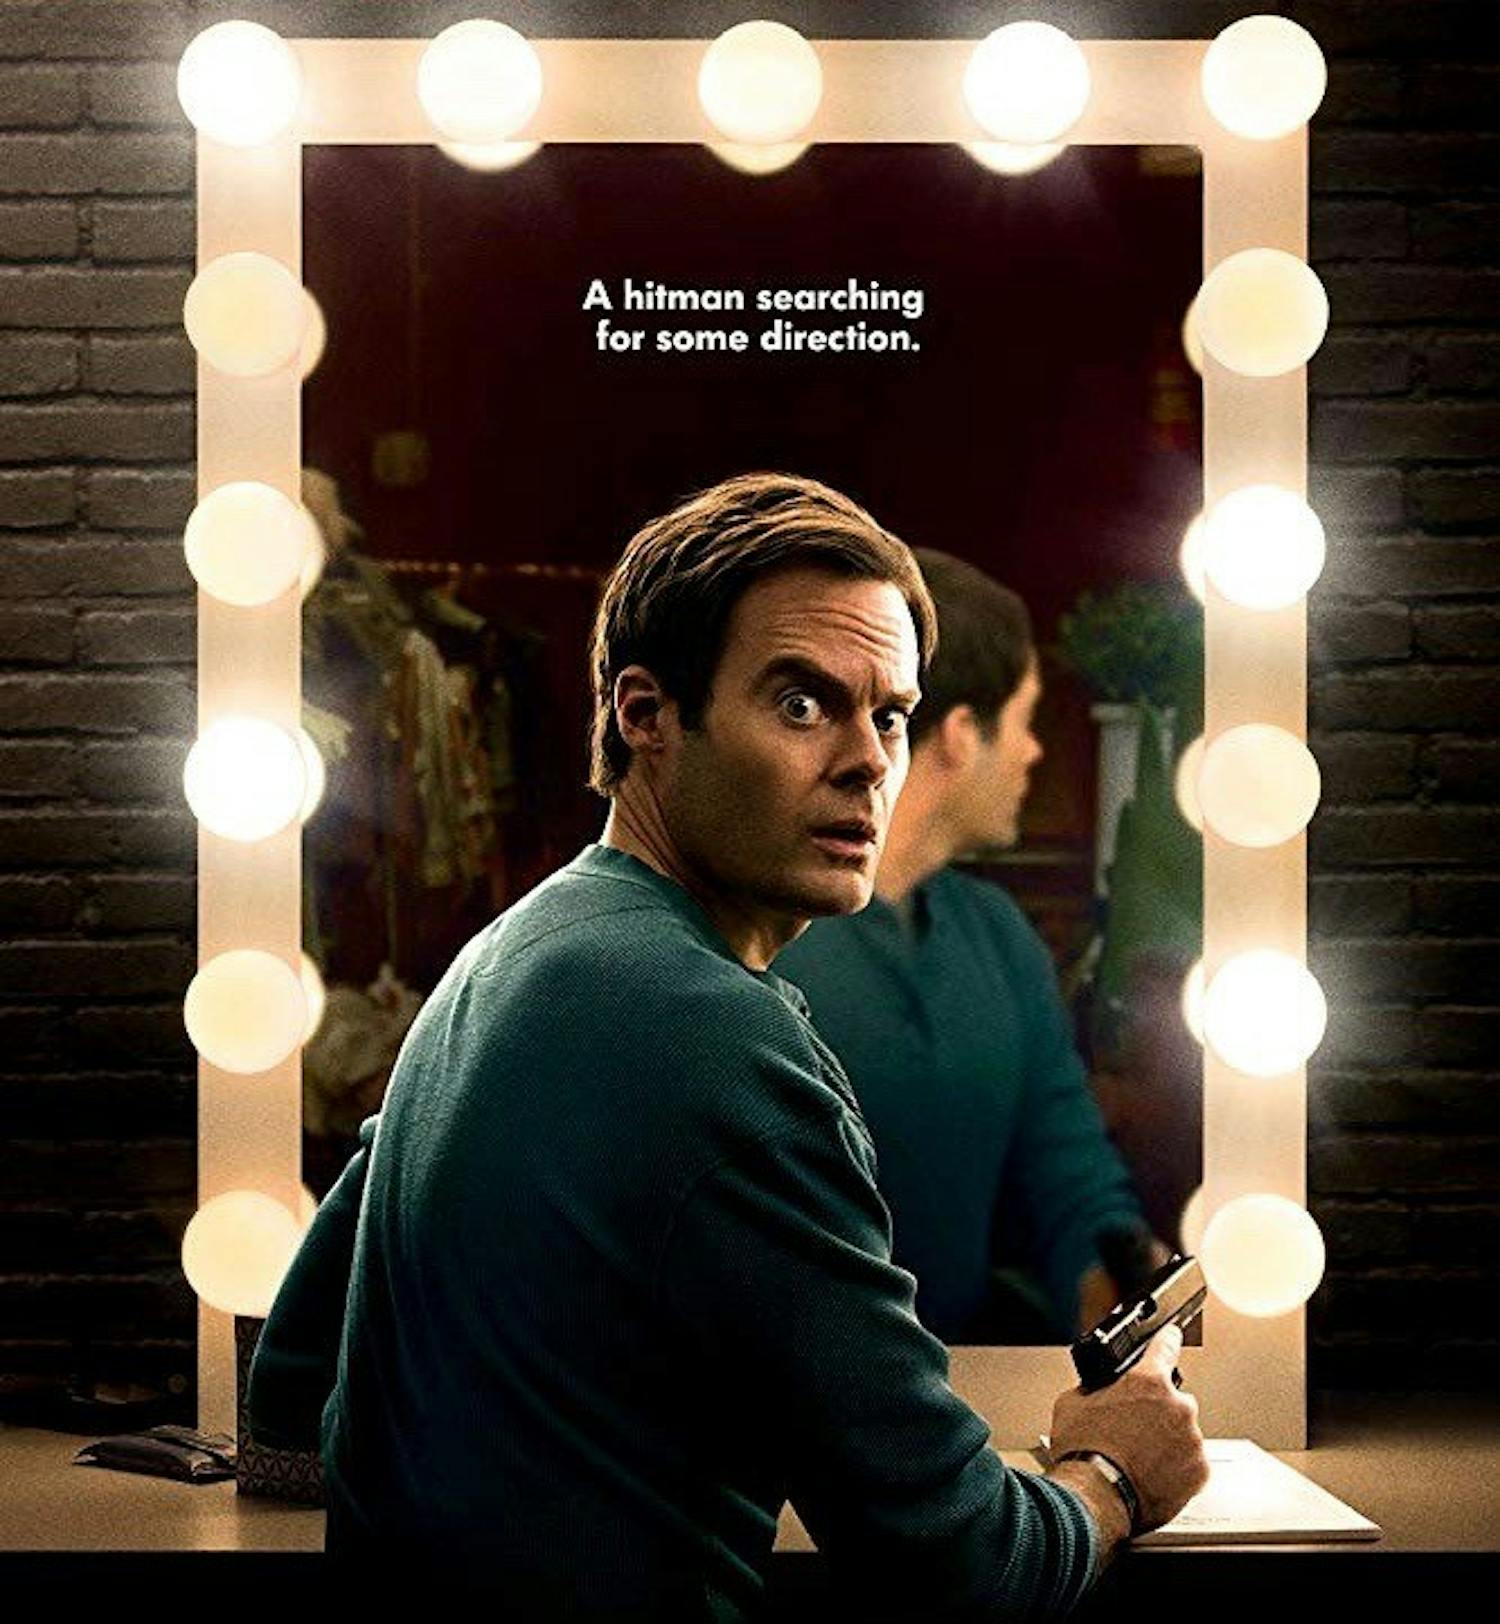 Proving to be a constantly enjoyable presence, Bill Hader without a doubt earned his Emmy for this show.